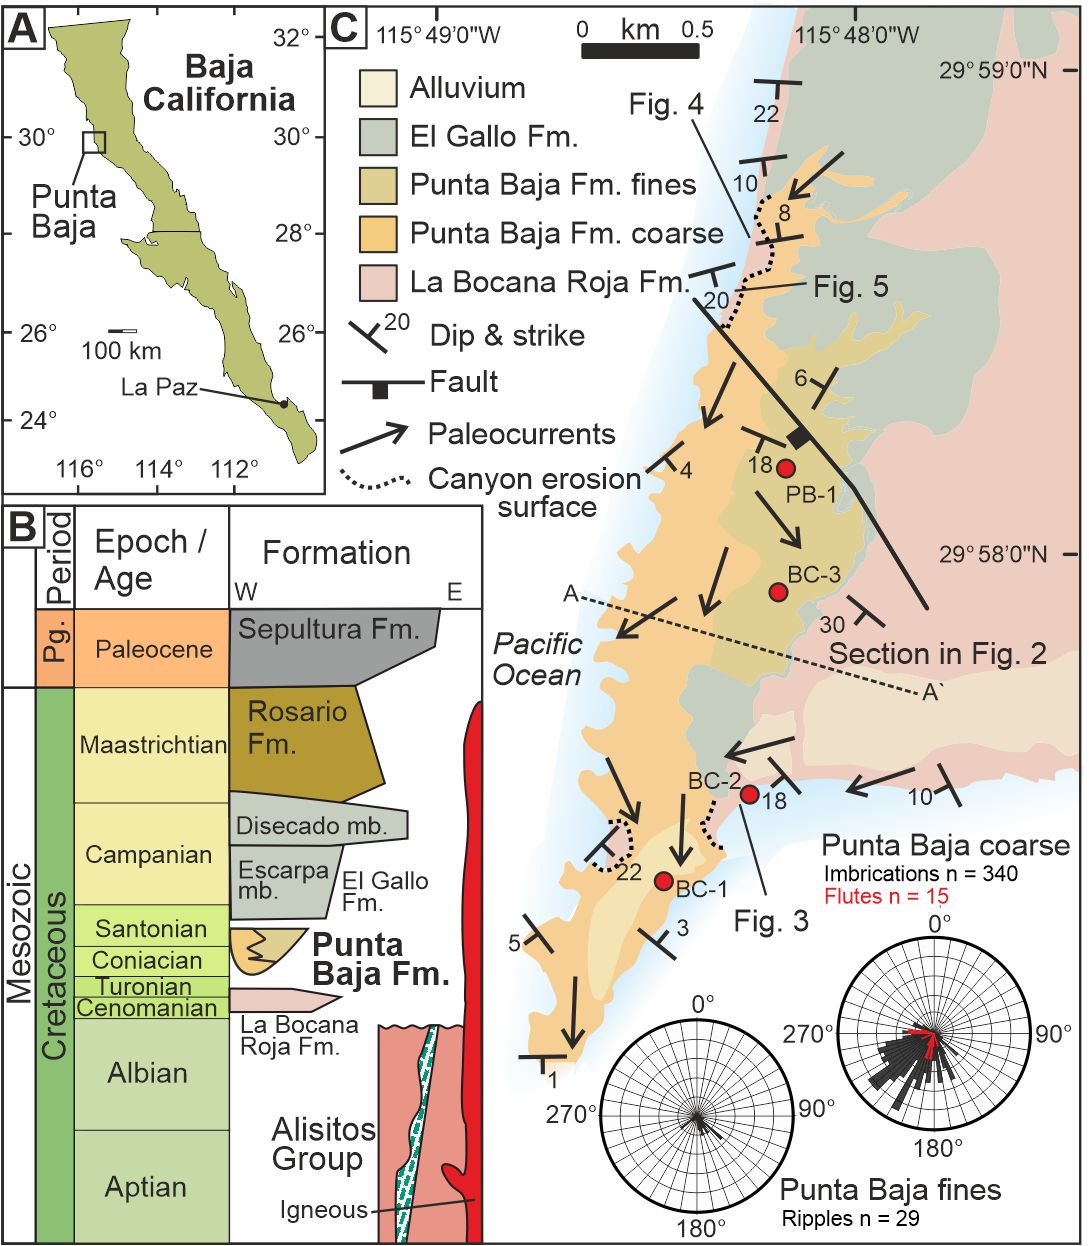 Key fossil-bearing outcrops that have previously suffered from